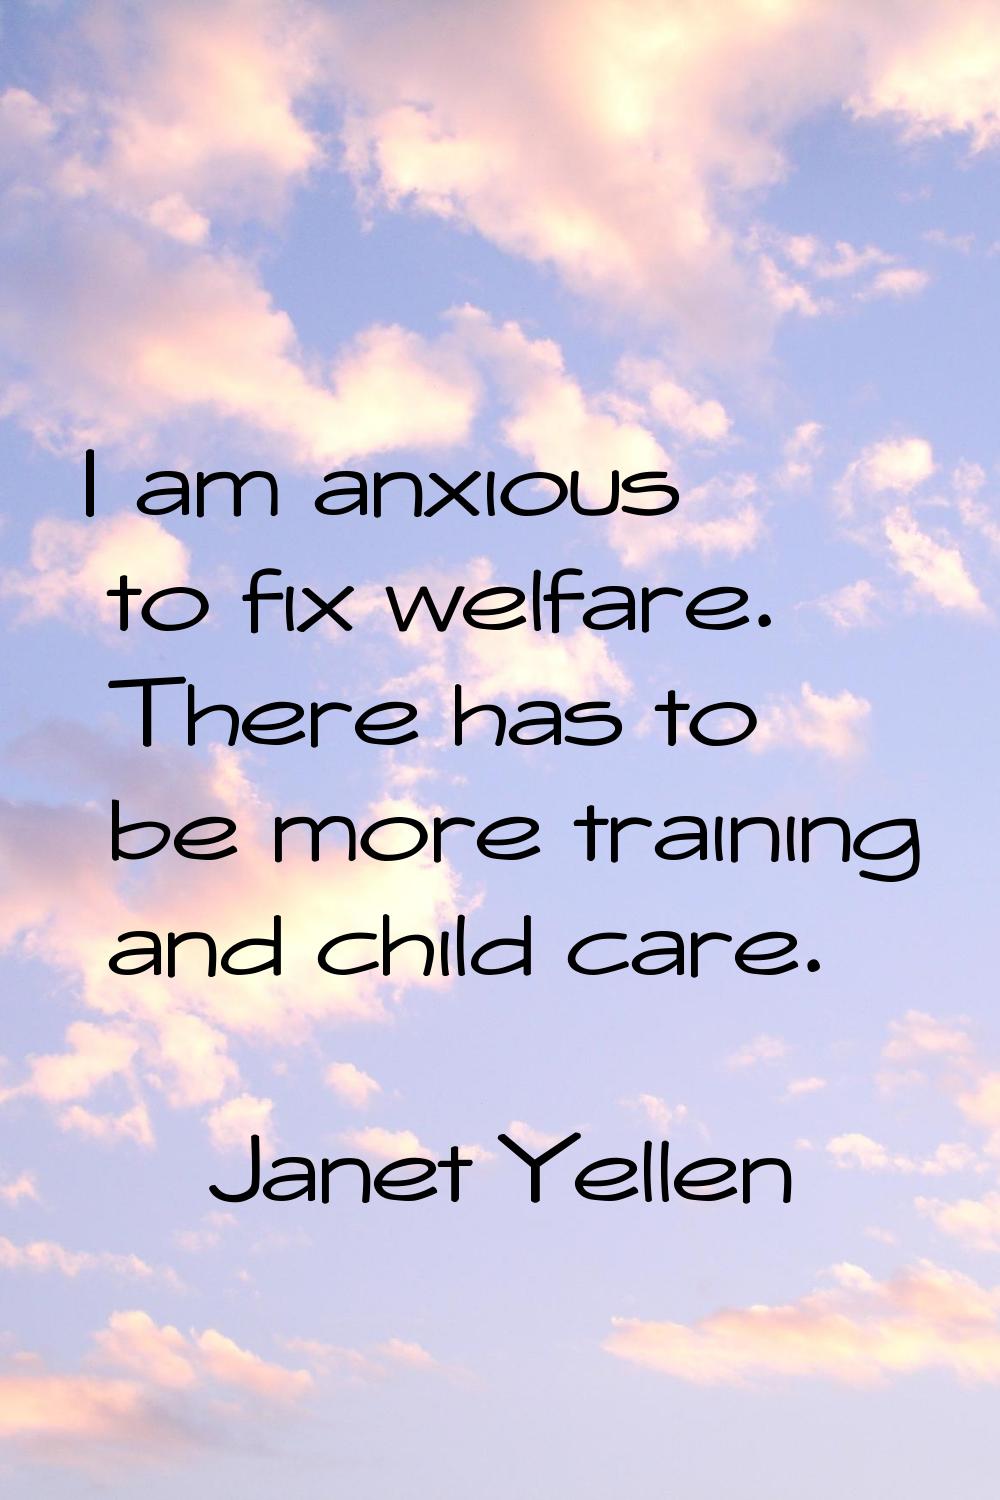 I am anxious to fix welfare. There has to be more training and child care.